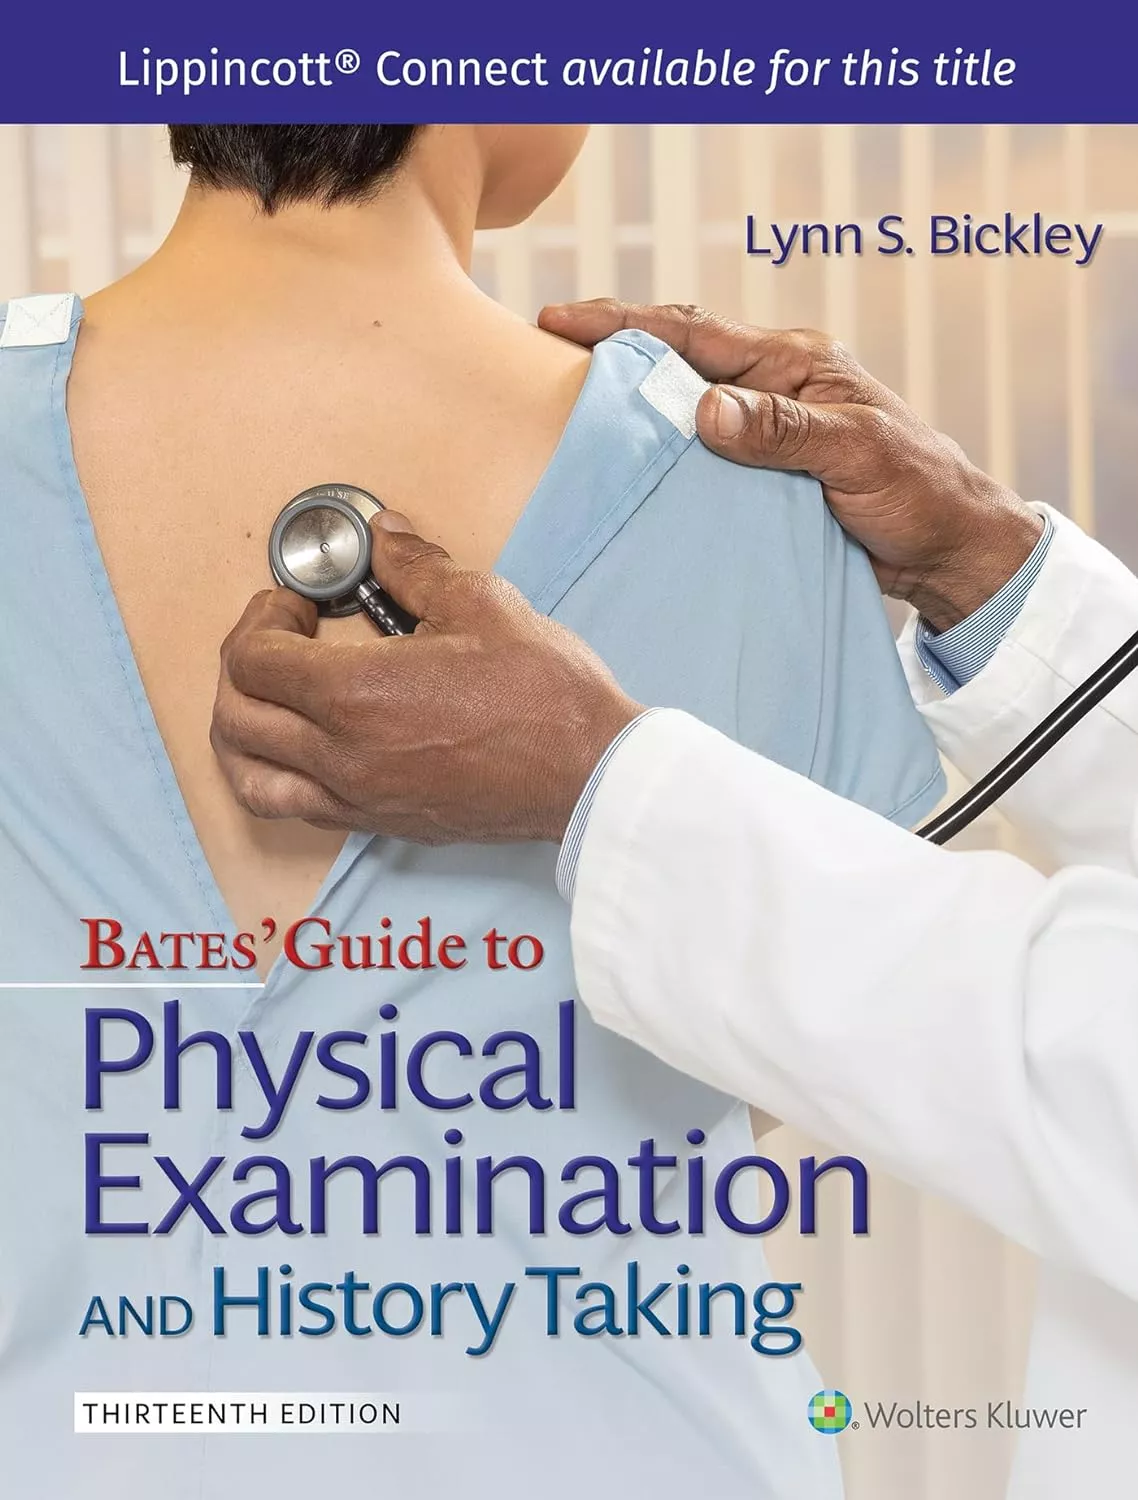 Bates' pocket guide to physical examination and history taking / Lynn S. Bickley, Peter G. Szilagyi, Richard M. Hoffman ; guest editor, Rainier P. Soriano